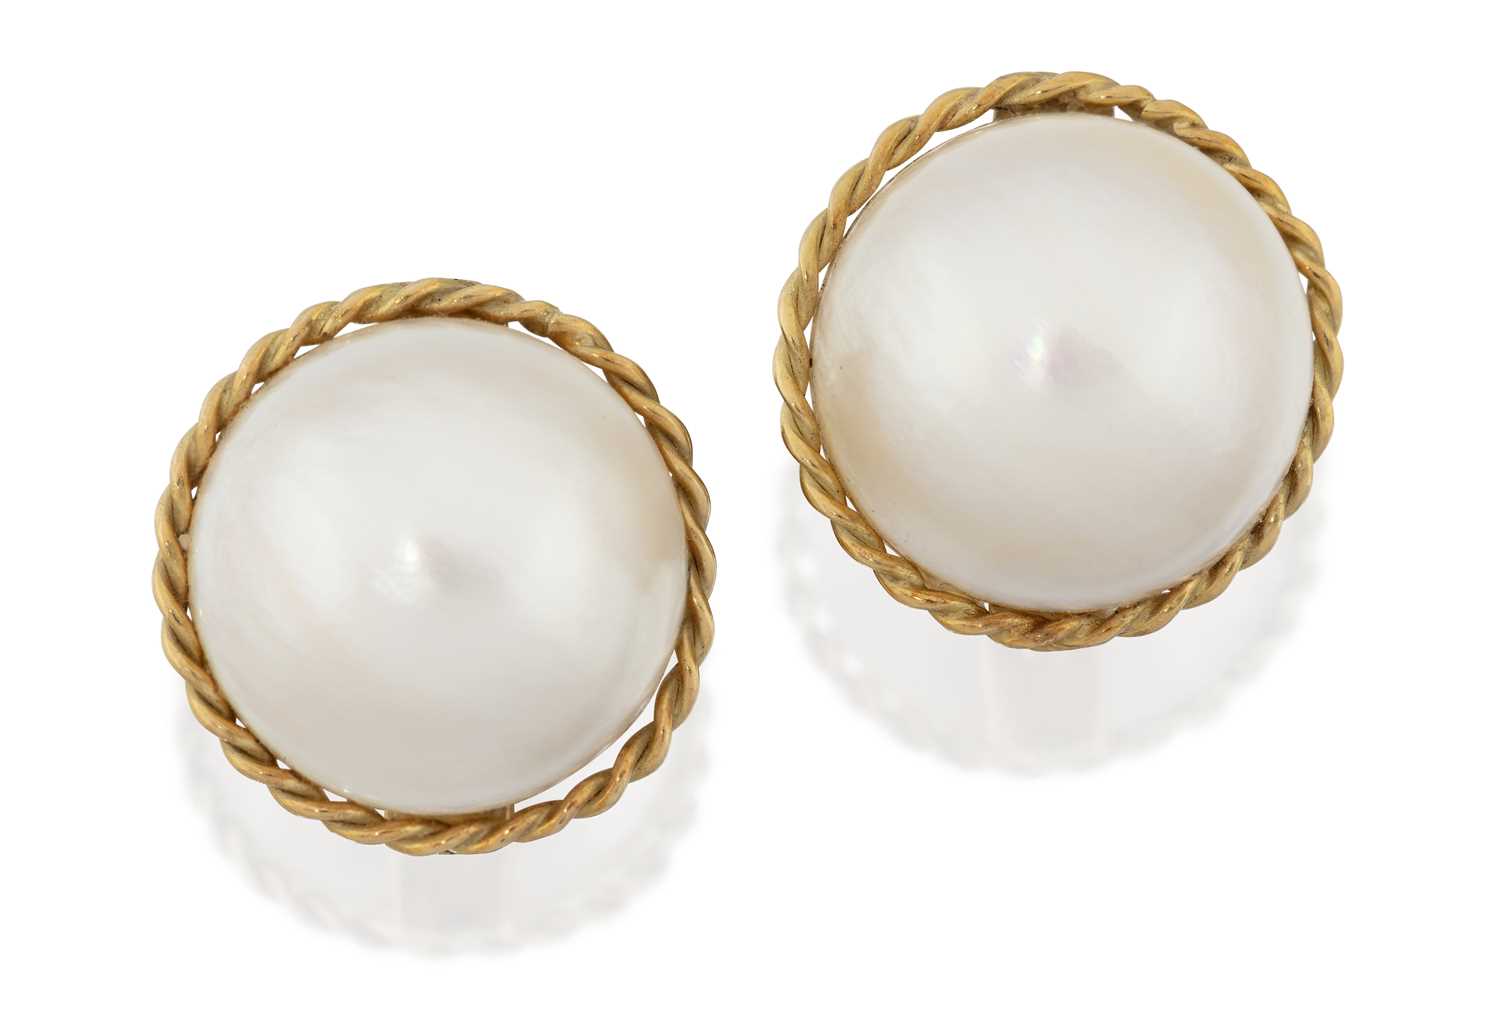 A Pair of 18 Carat Gold Mabe Pearl Earrings